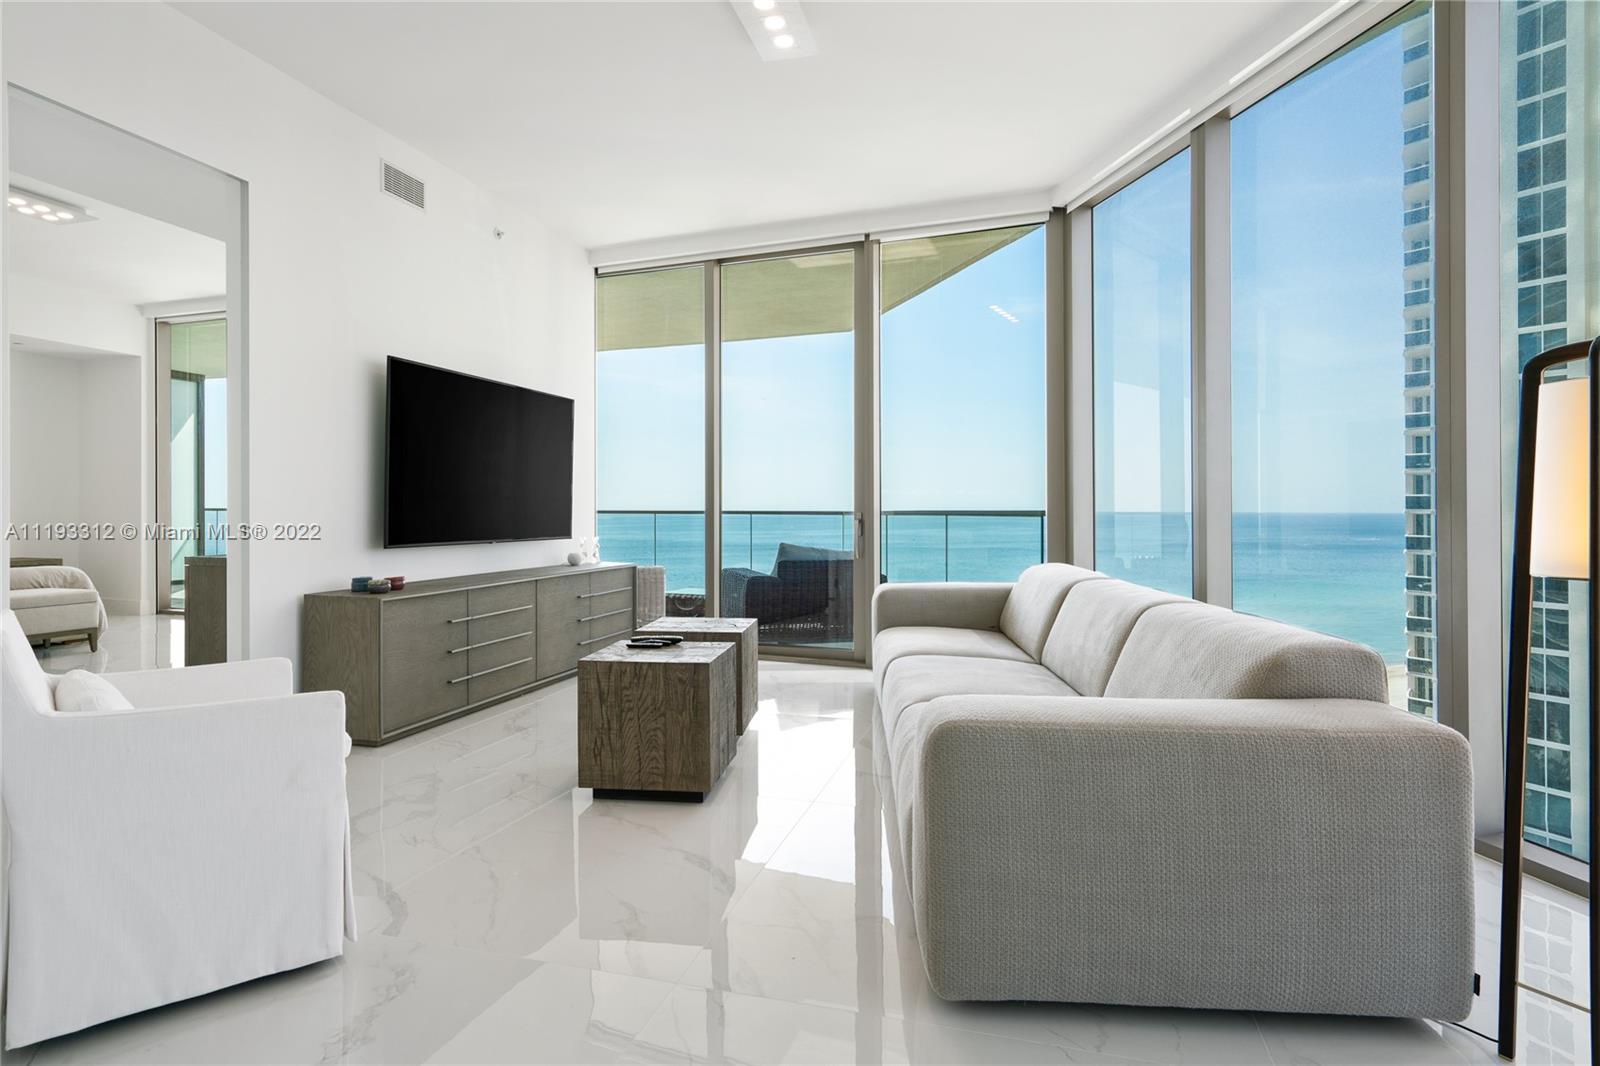 Stunning 2 bedrooms & 2.5 bathrooms residence with breathtaking views of the ocean and city skyline. Newly built, Armani Casa Residences is the most elegant address in Sunny Isles. 11th floor, 10" ft ceilings, surrounded with floor to ceiling windows. Corner unit with deep terraces and outdoor summer kitchen. Chefs kitchen by Armani Dada and state of the art appliances. Resort like amenities with beach & pool service, spa, oceanfront restaurant, movie theatre, fitness center, game room, yoga room, prive lounge and much more.